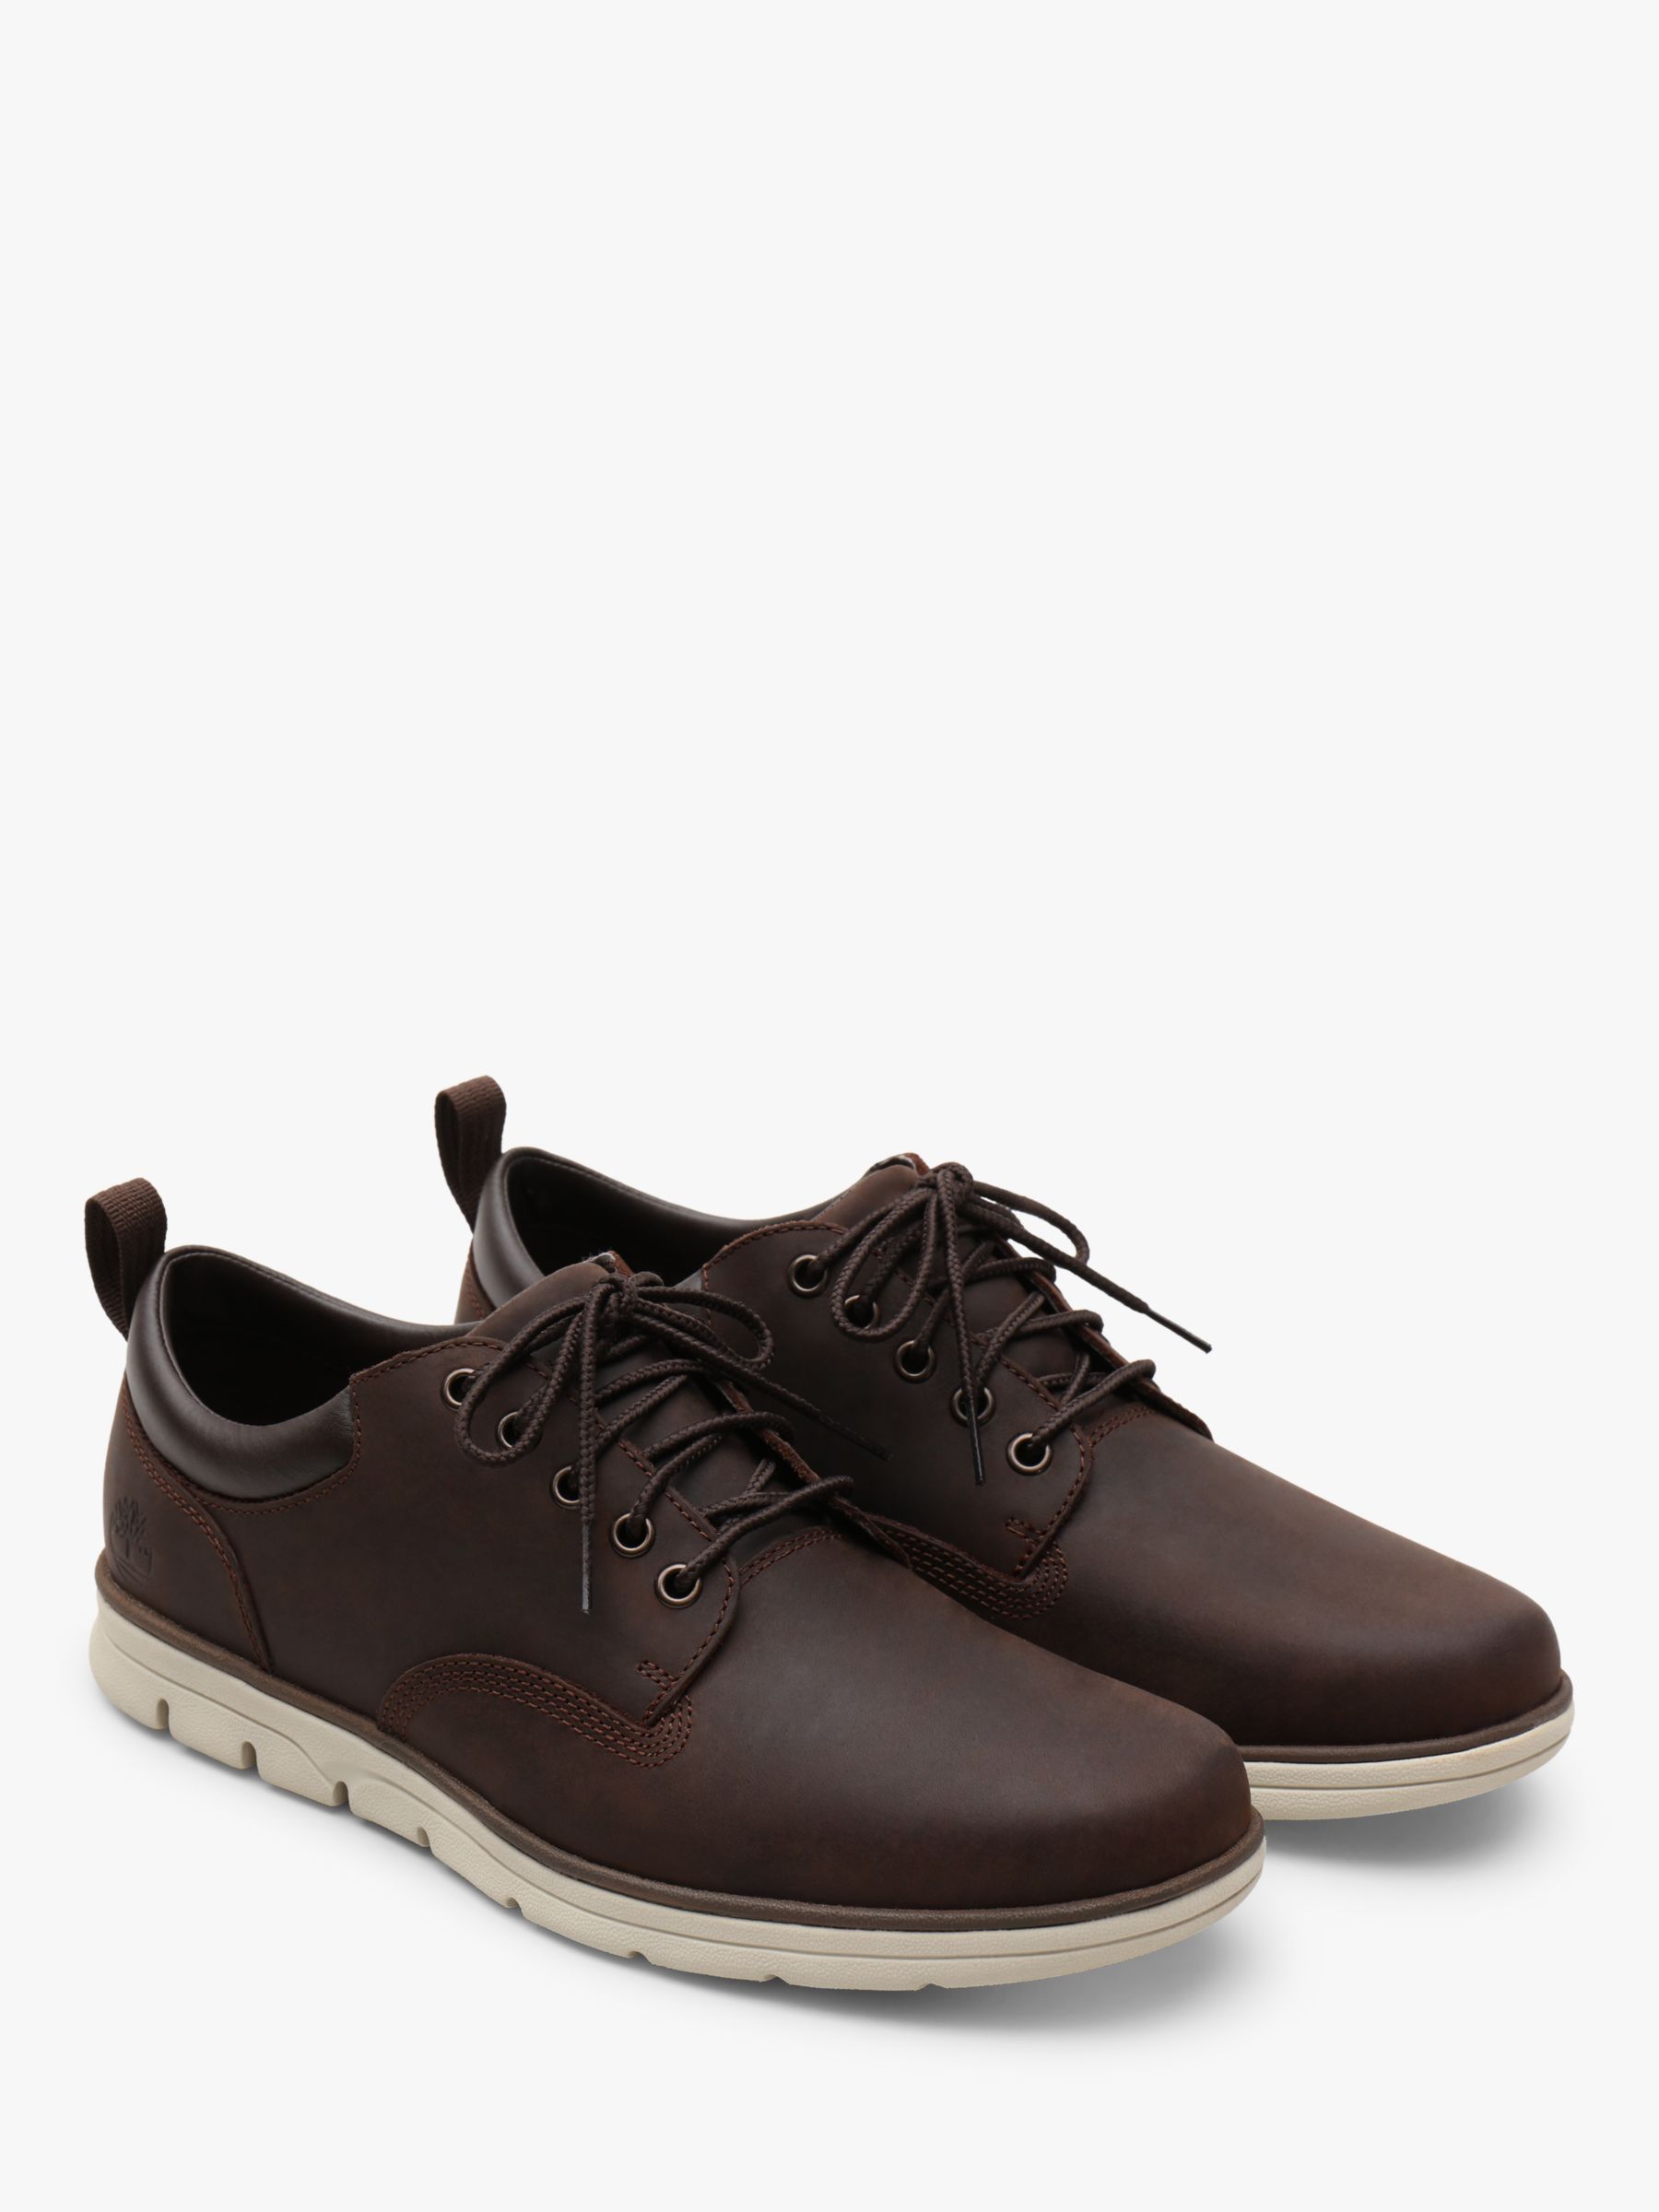 Timberland Bradstreet Oxford Shoes, Brown